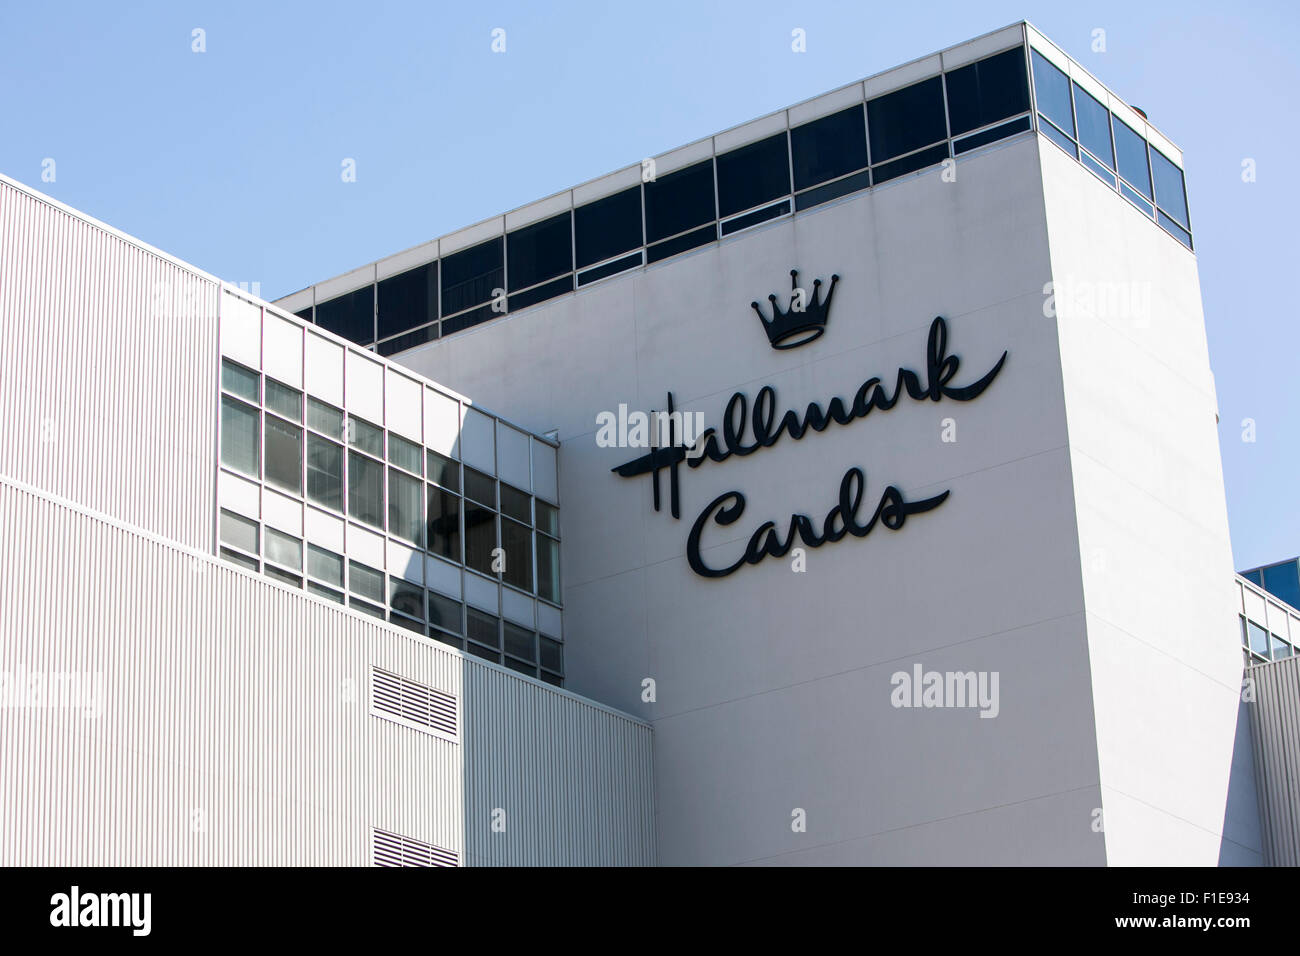 A logo sign outside of the headquarters of Hallmark Cards in Kansas City, Missouri, on August 23, 2015. Stock Photo